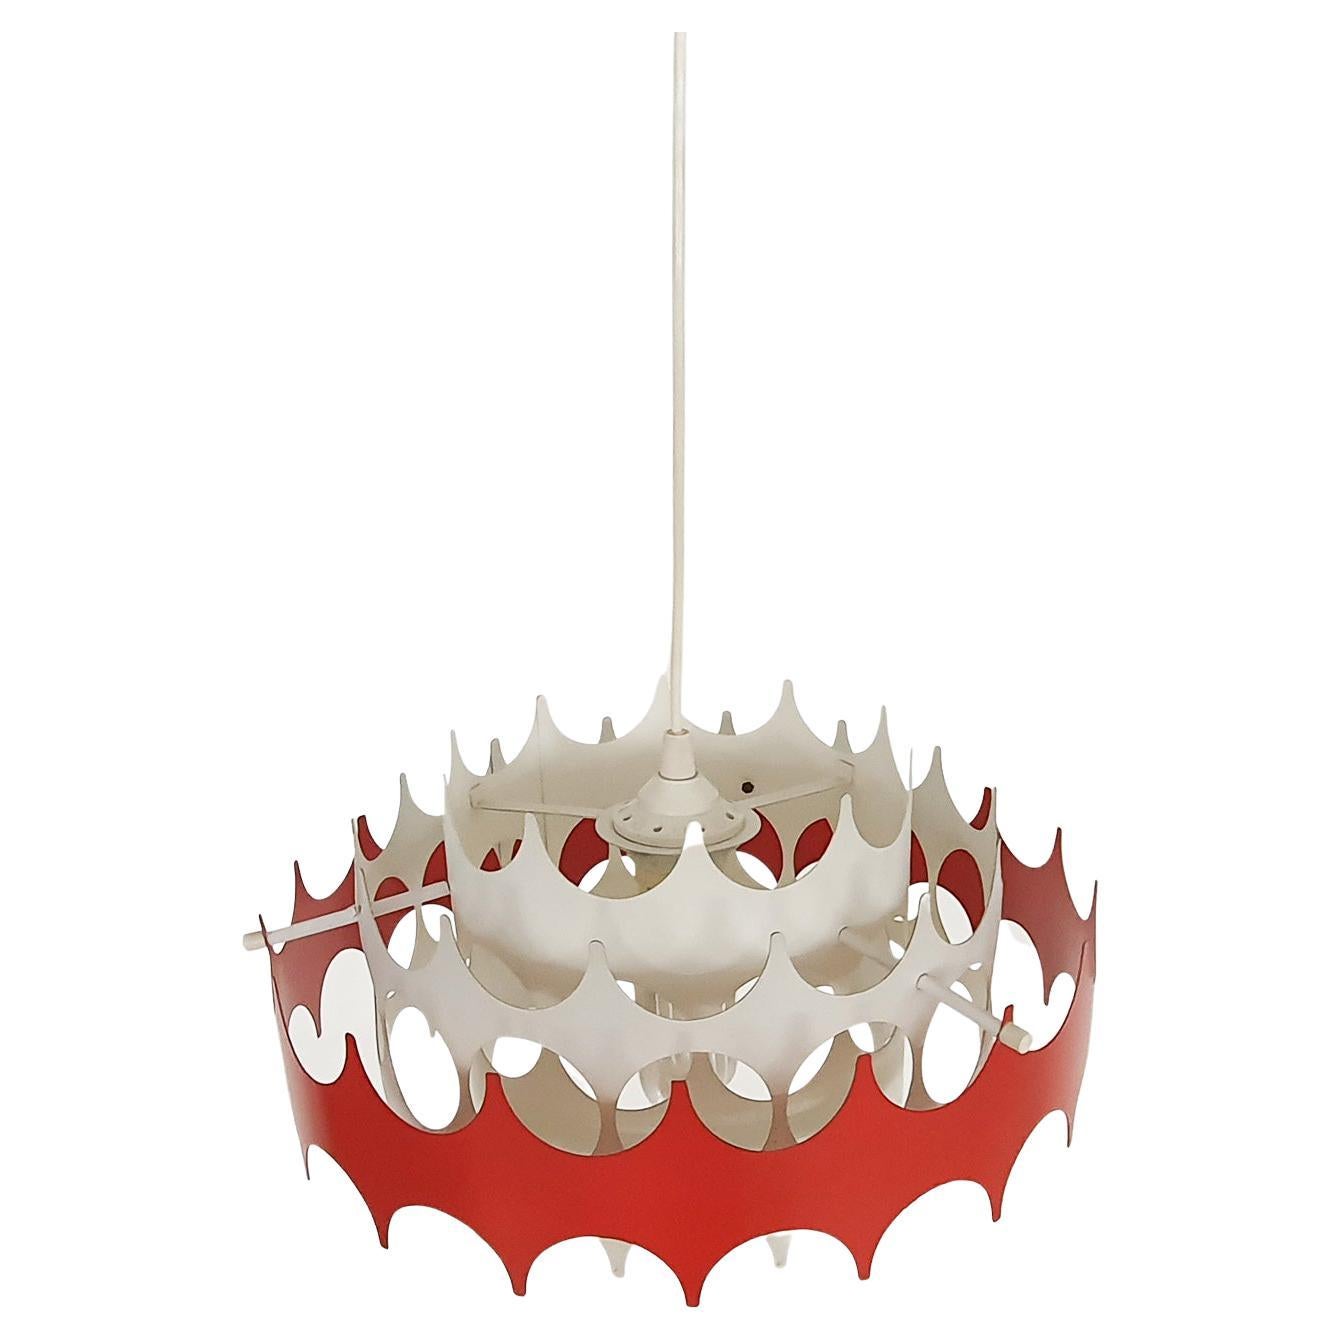 Pendant light in red and white metal by Doria.